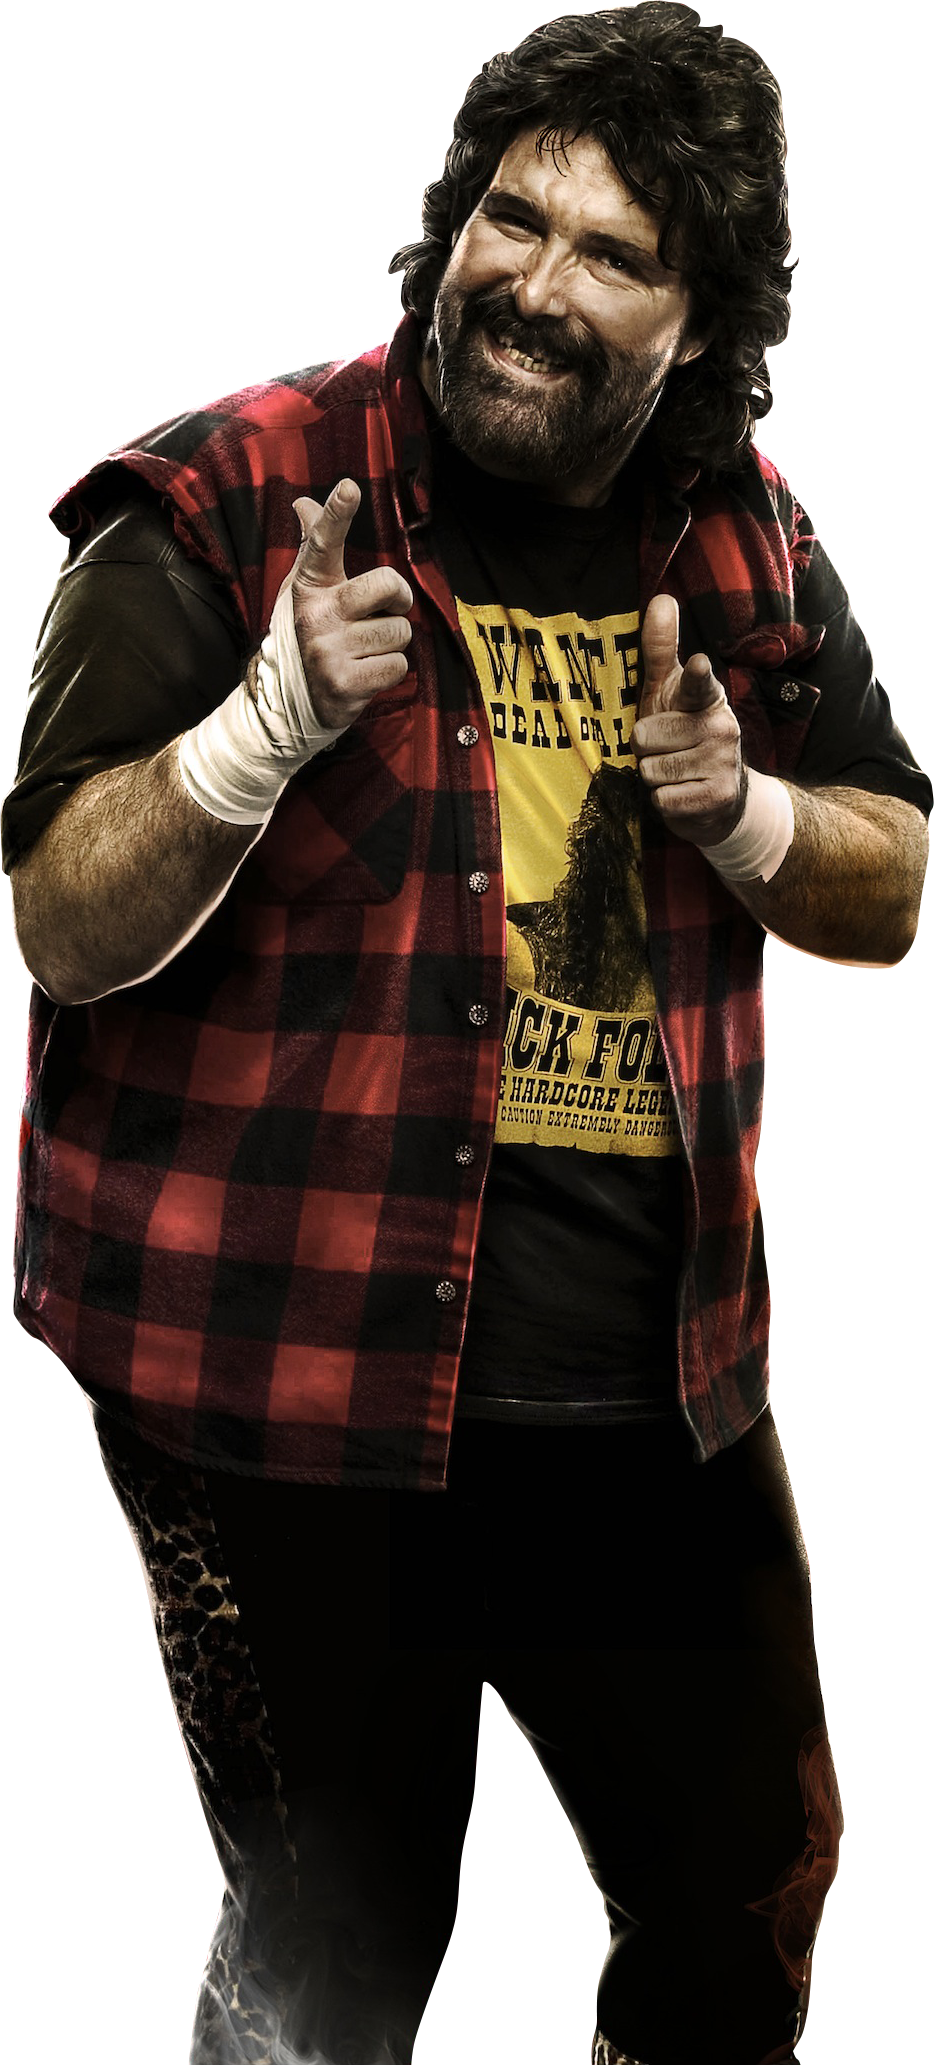 Download PNG image - Mick Foley PNG Pic 